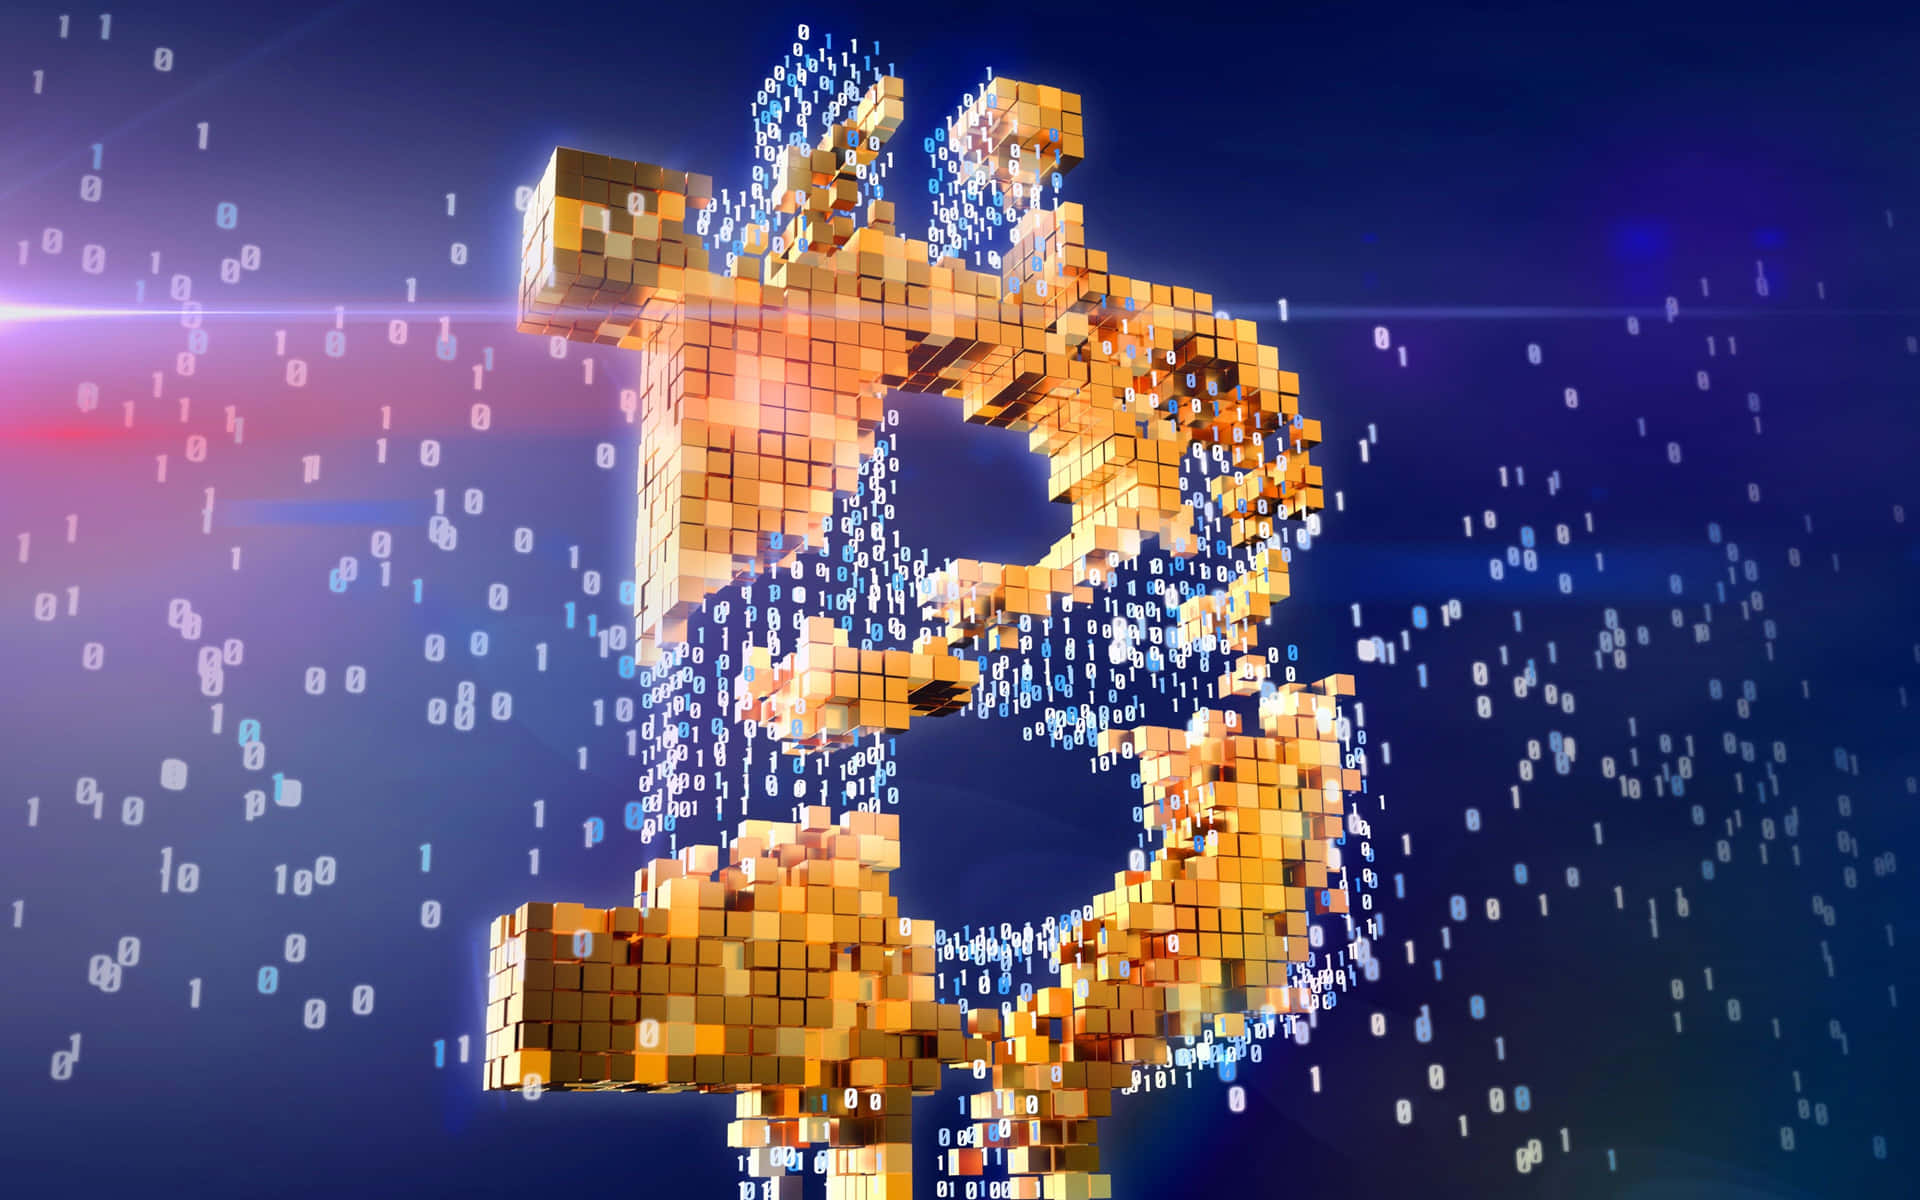 Bitcoin Symbol In 3d Rendered On A Blue Background Wallpaper